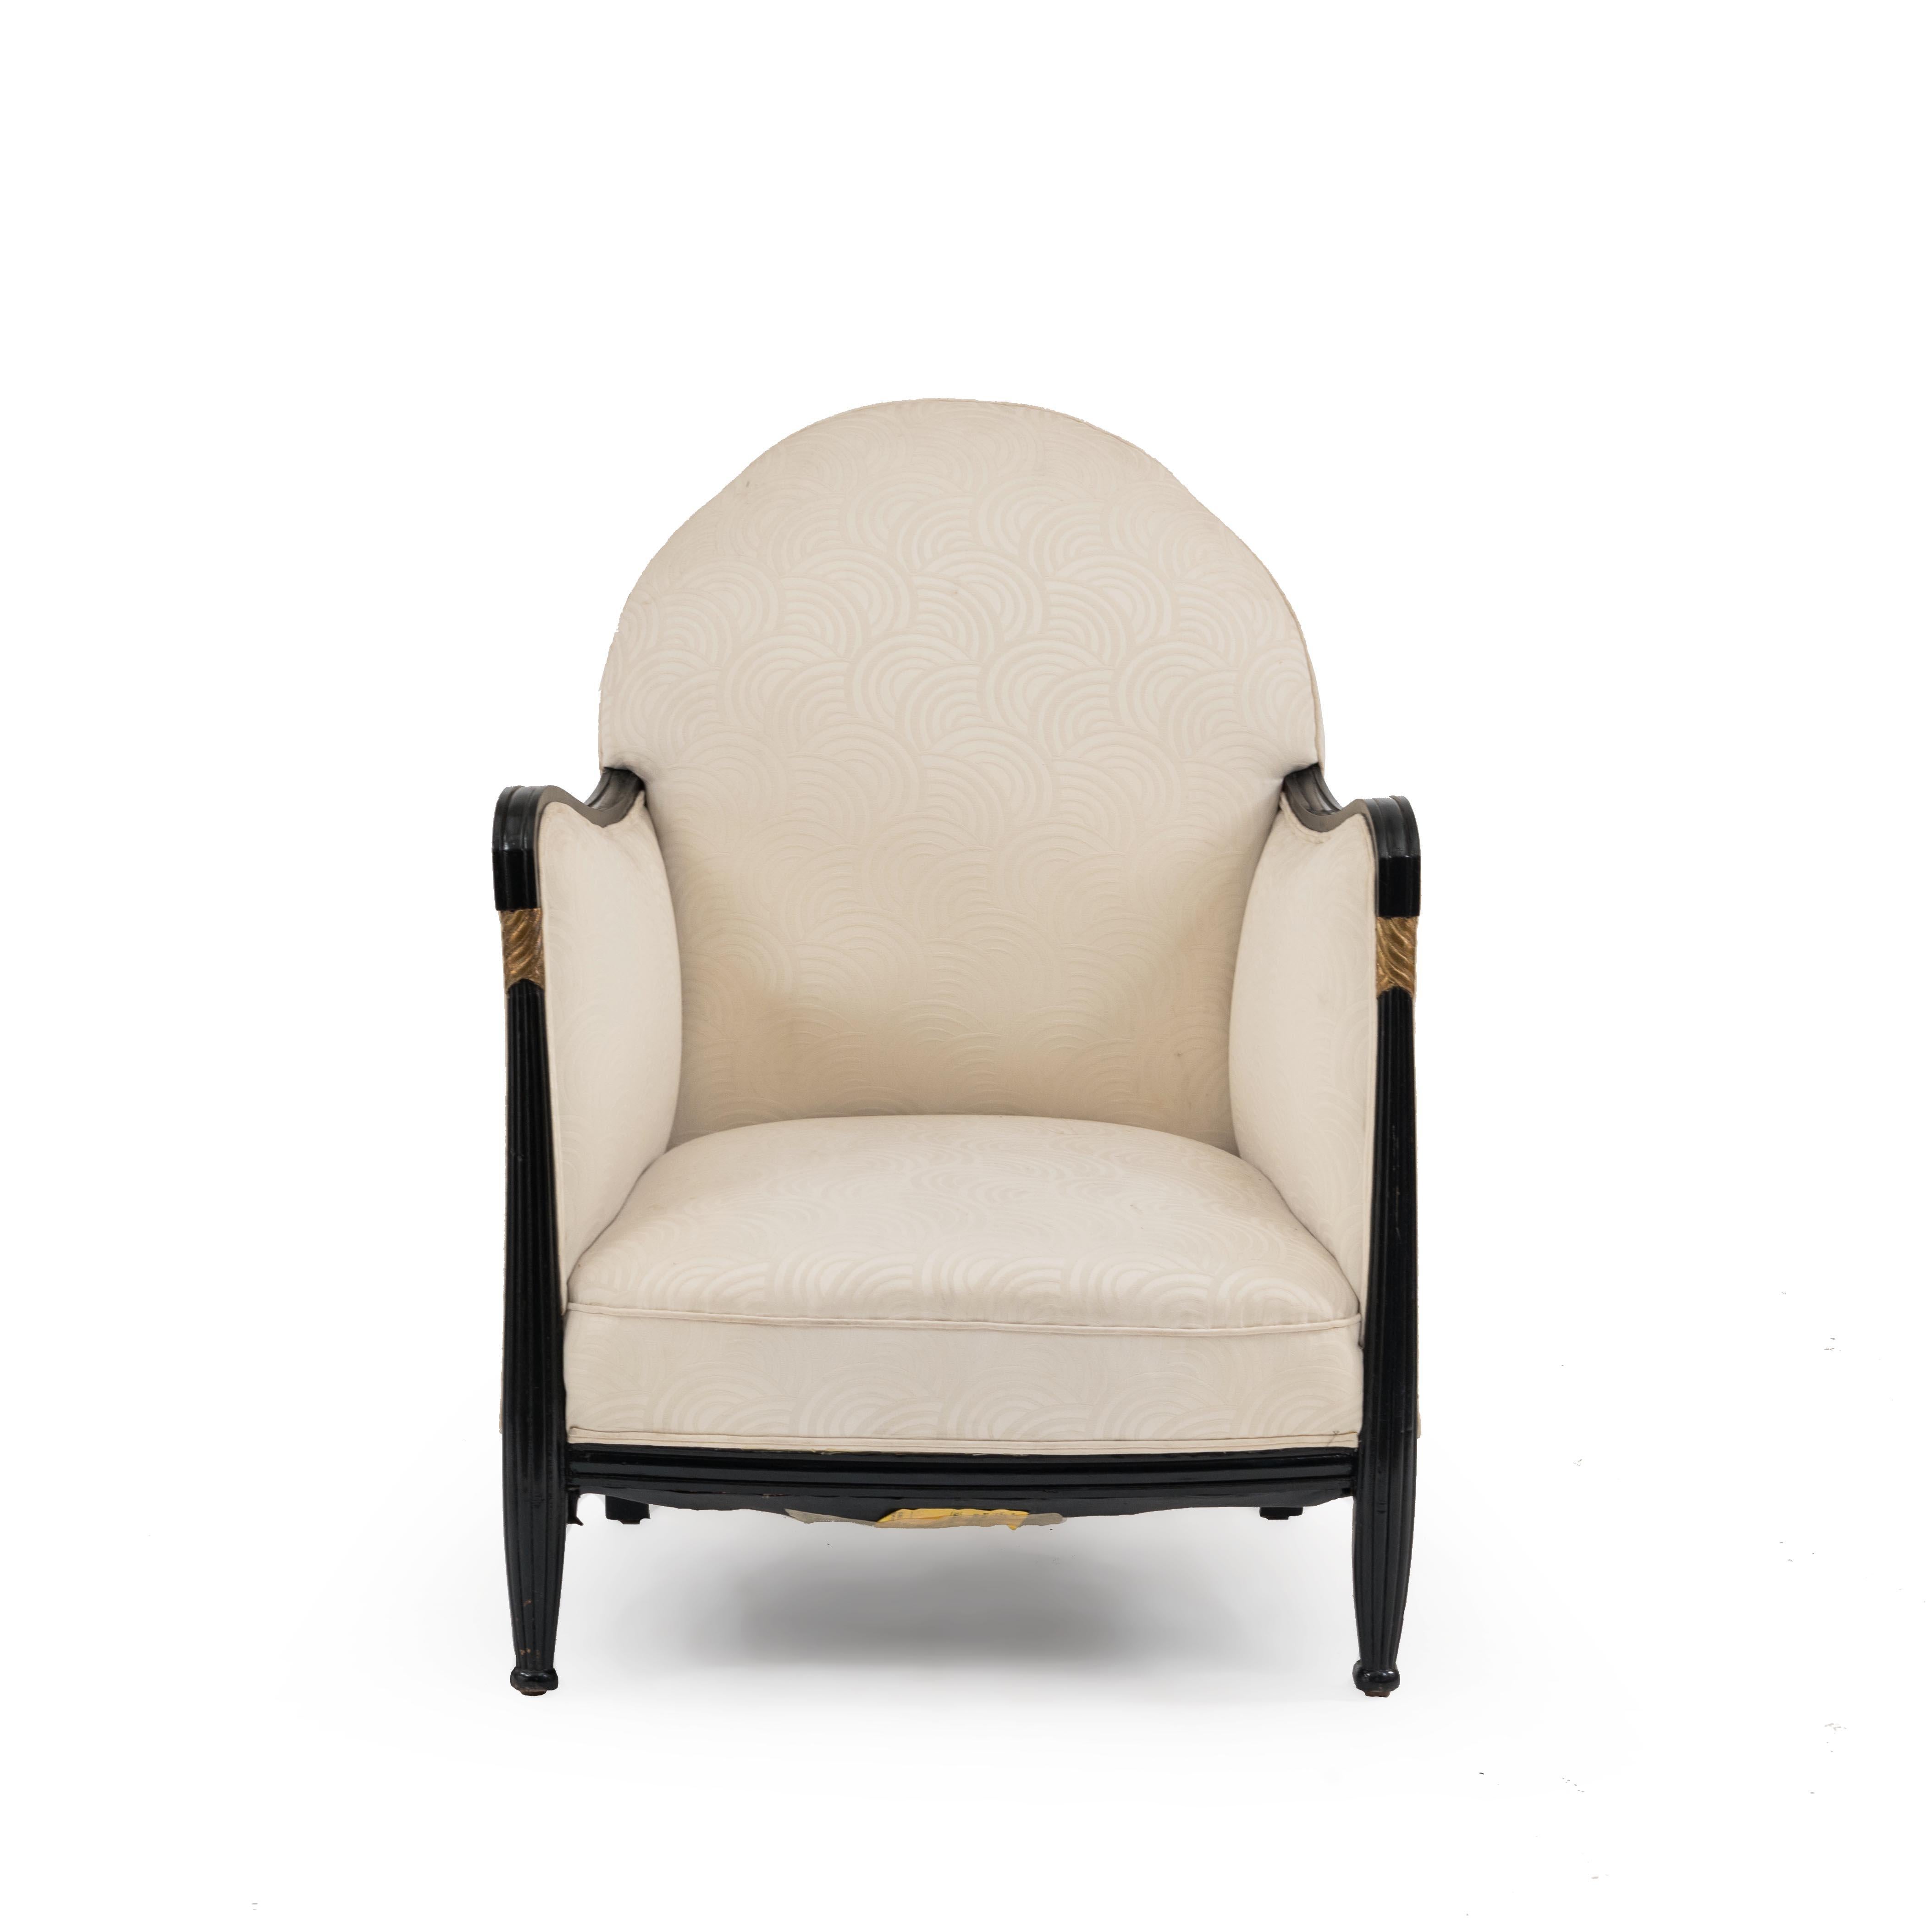 Pair of French Art Deco black lacquered and gilt trimmed bergère armchairs with white circle upholstery.